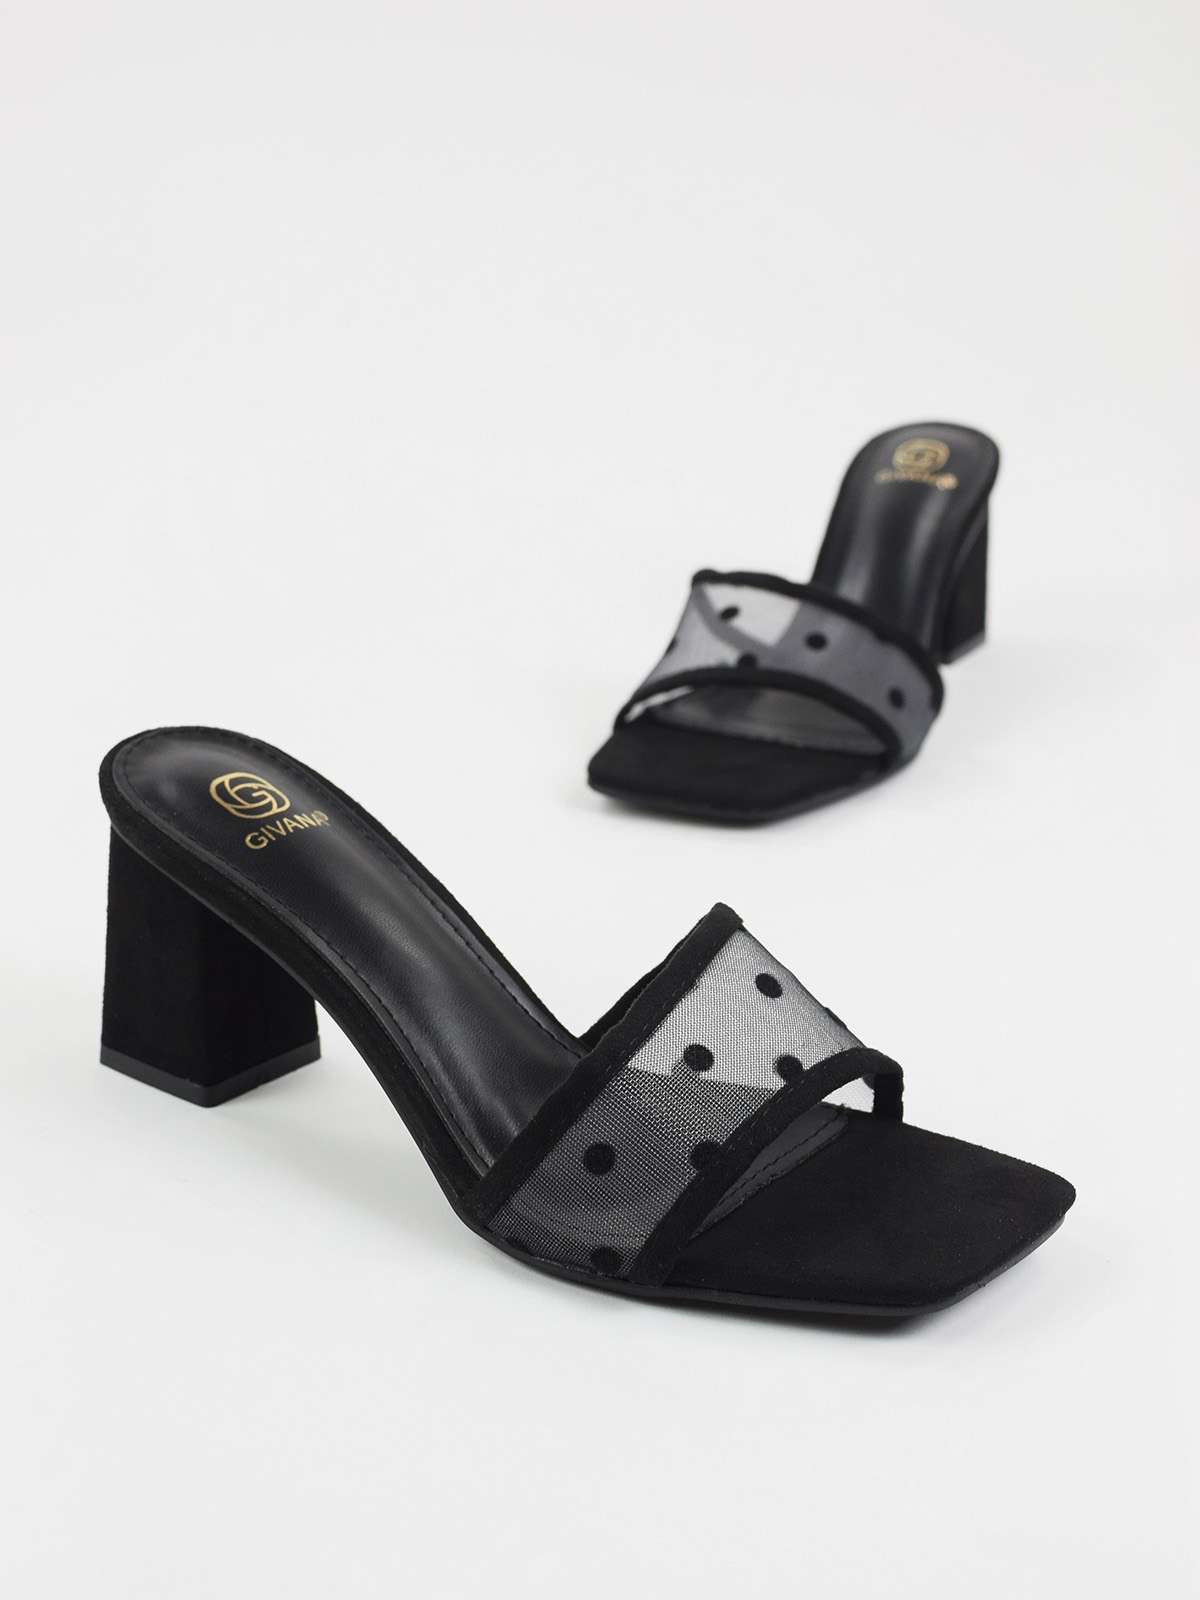 Mule sandals with mid fat heel in black